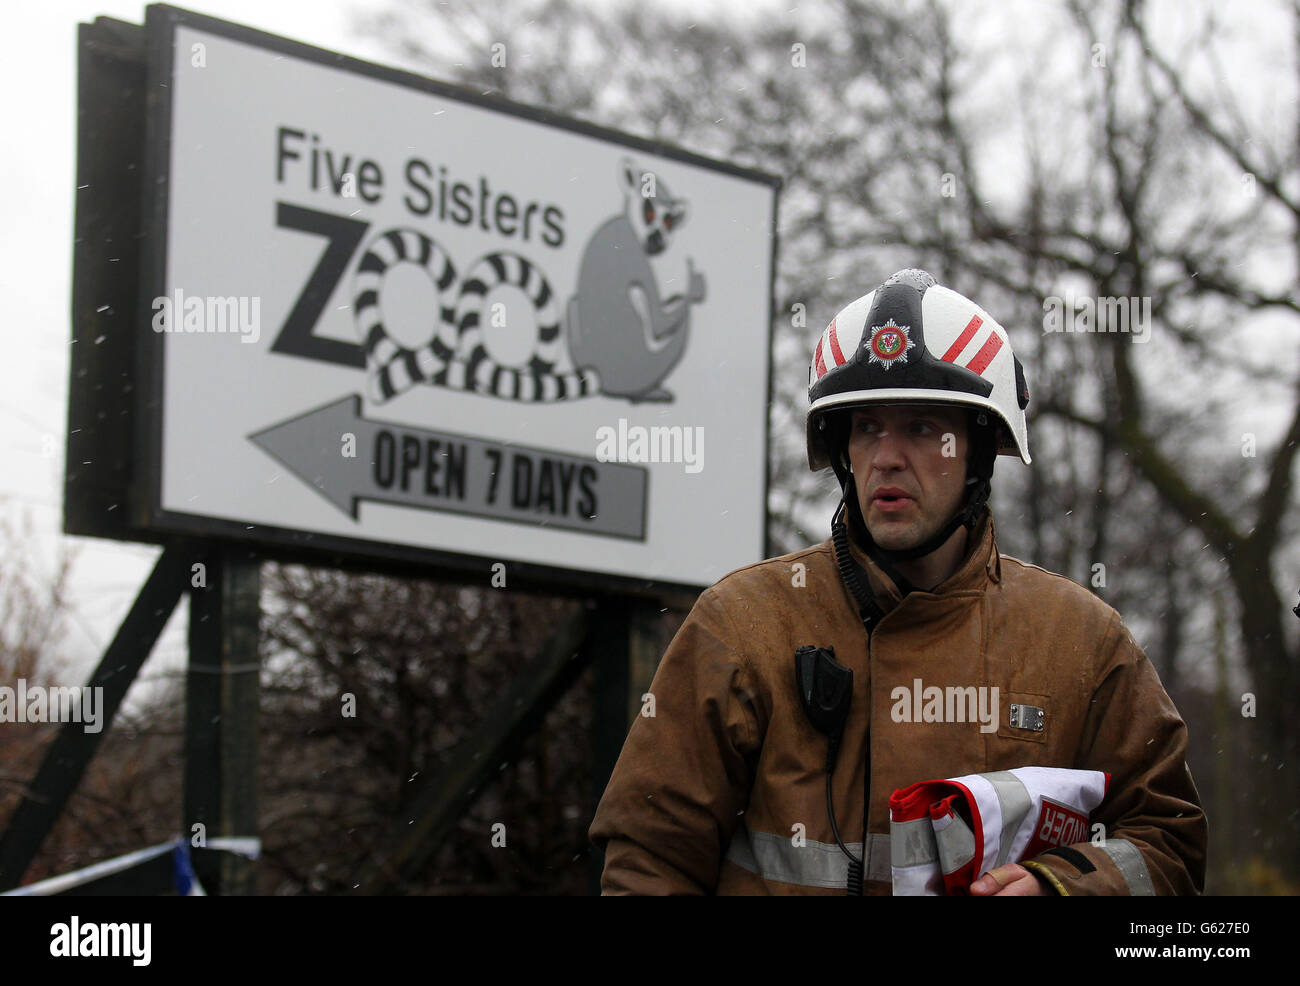 Fire at Five Sisters Zoo. A firefighter views the damage to the reptile house at the Five Sisters Zoo at Polbeth, West Calder. Stock Photo